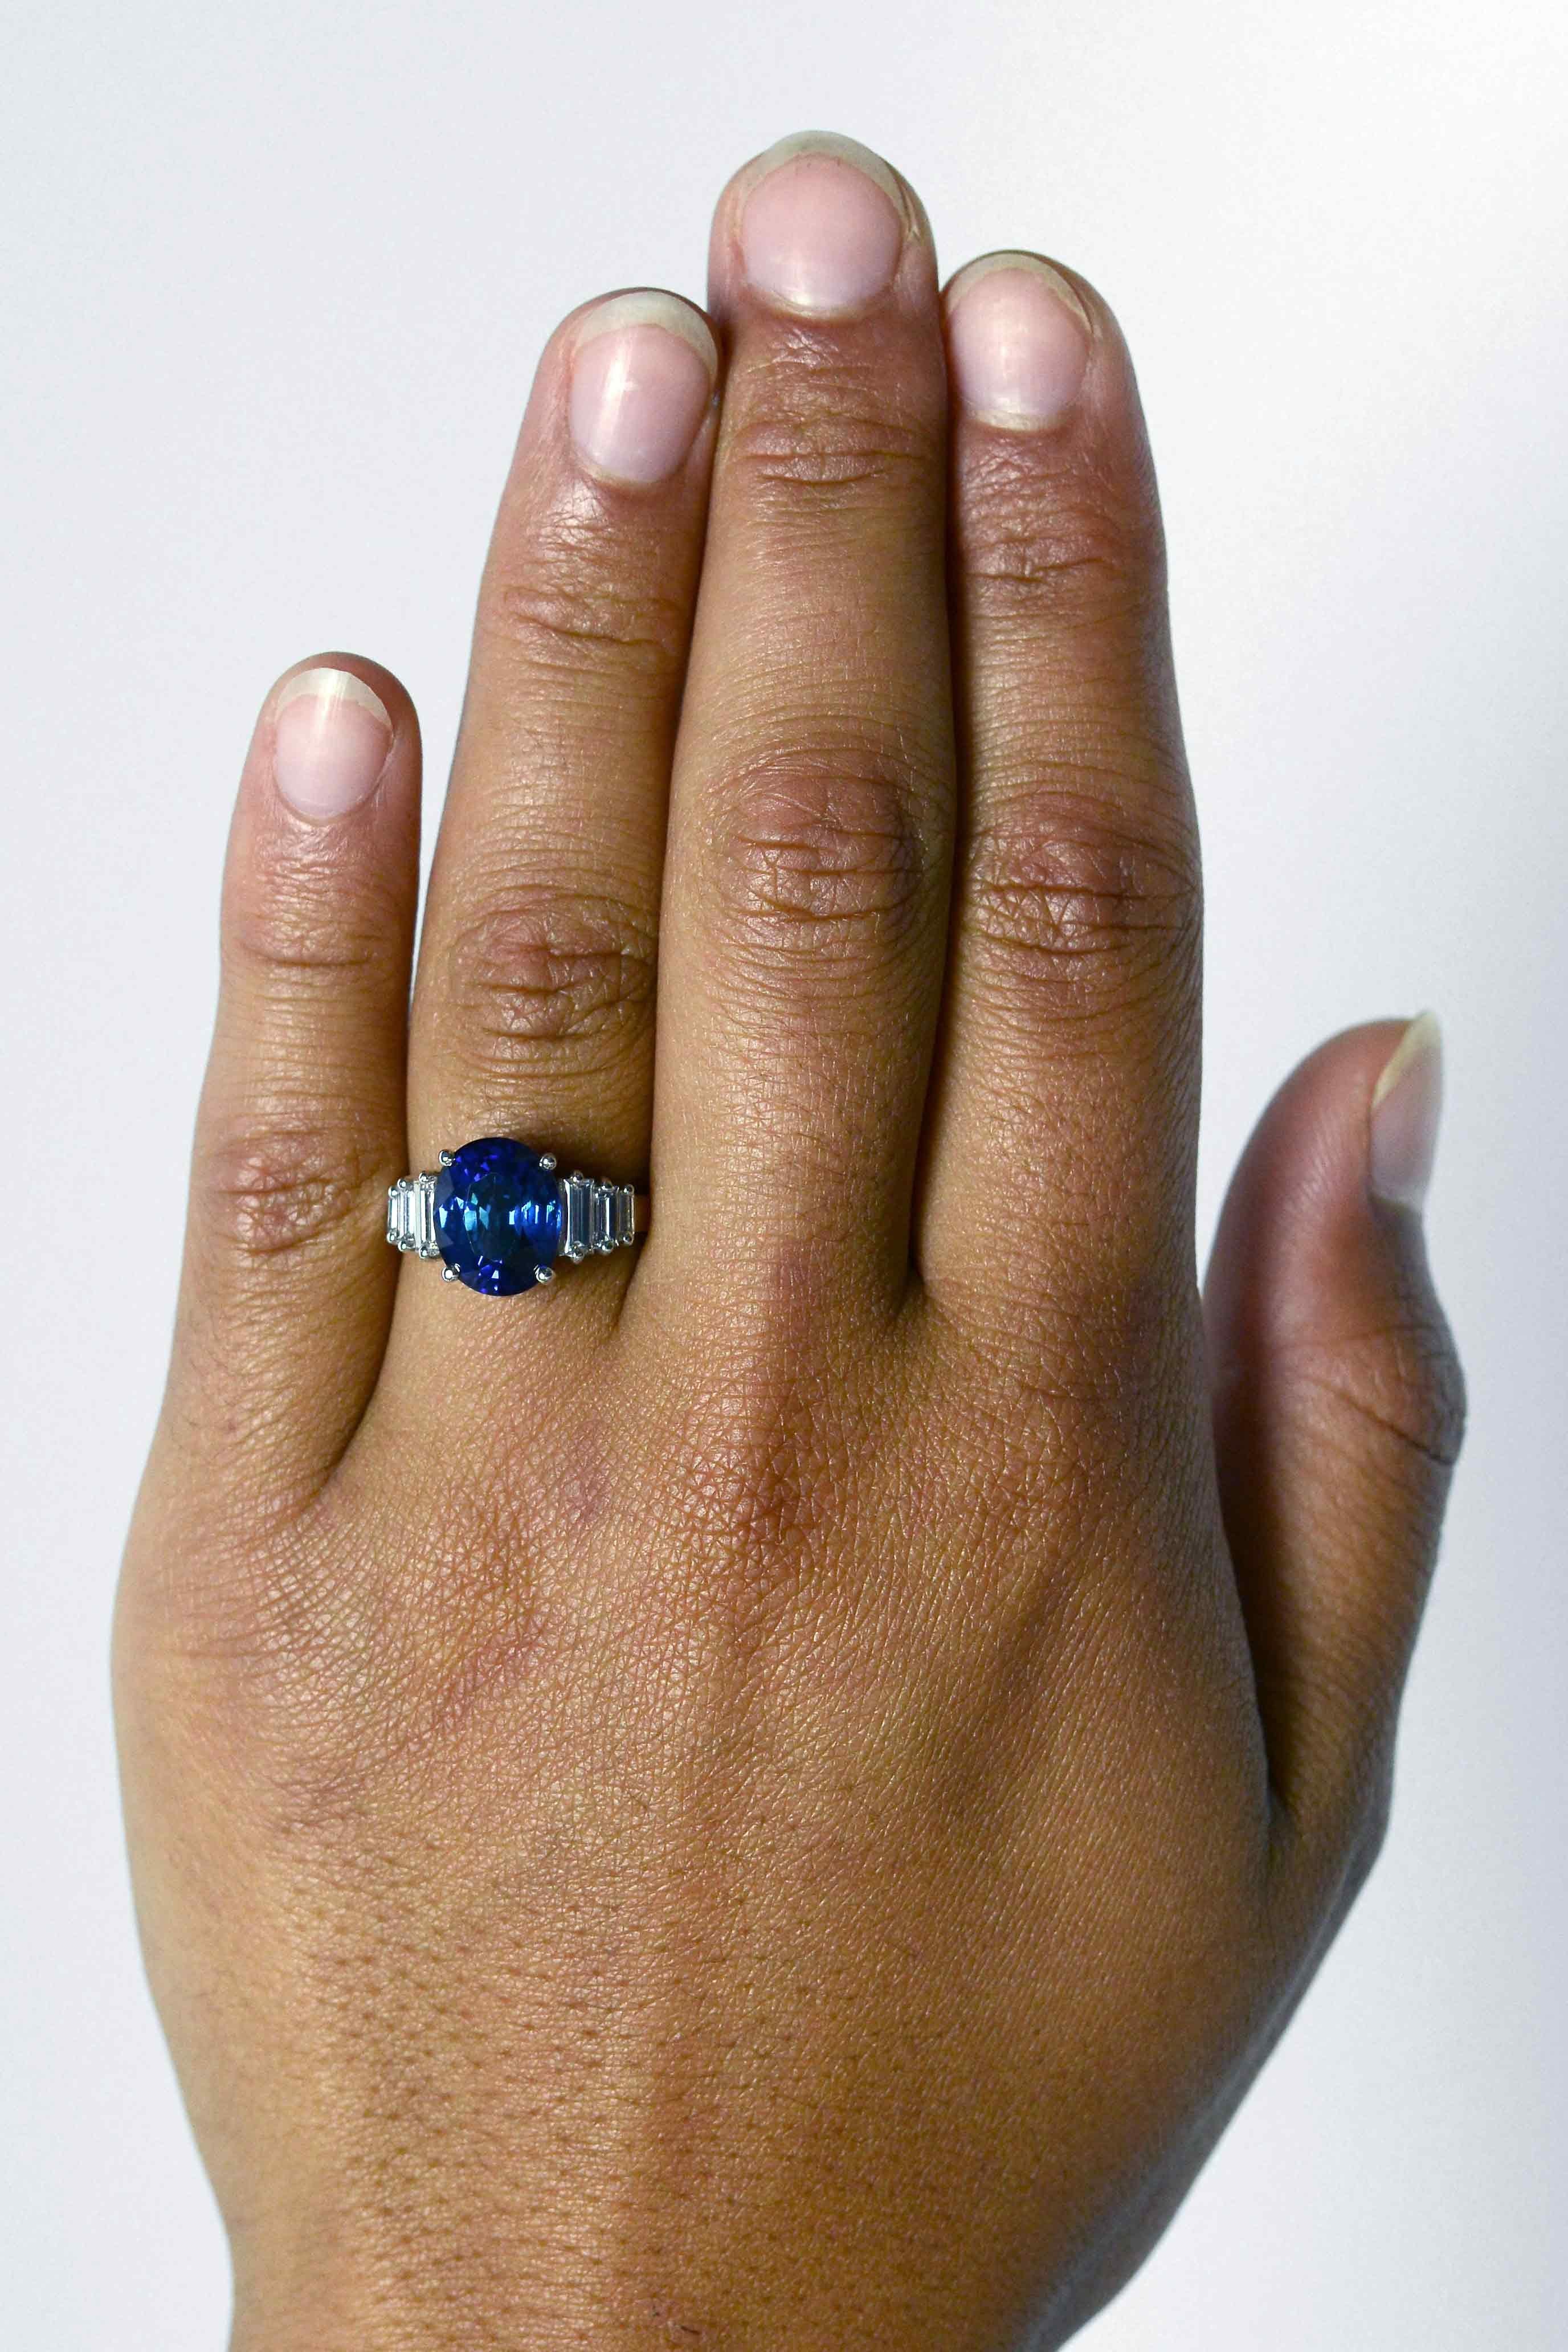 This vivid, natural blue sapphire engagement gemstone ring centers on a captivating, GIA certified 4.39 carat sapphire of a deeply saturated, rich velvety hue. The custom Art Deco style tiered staircase setting is complimented by baguette diamond